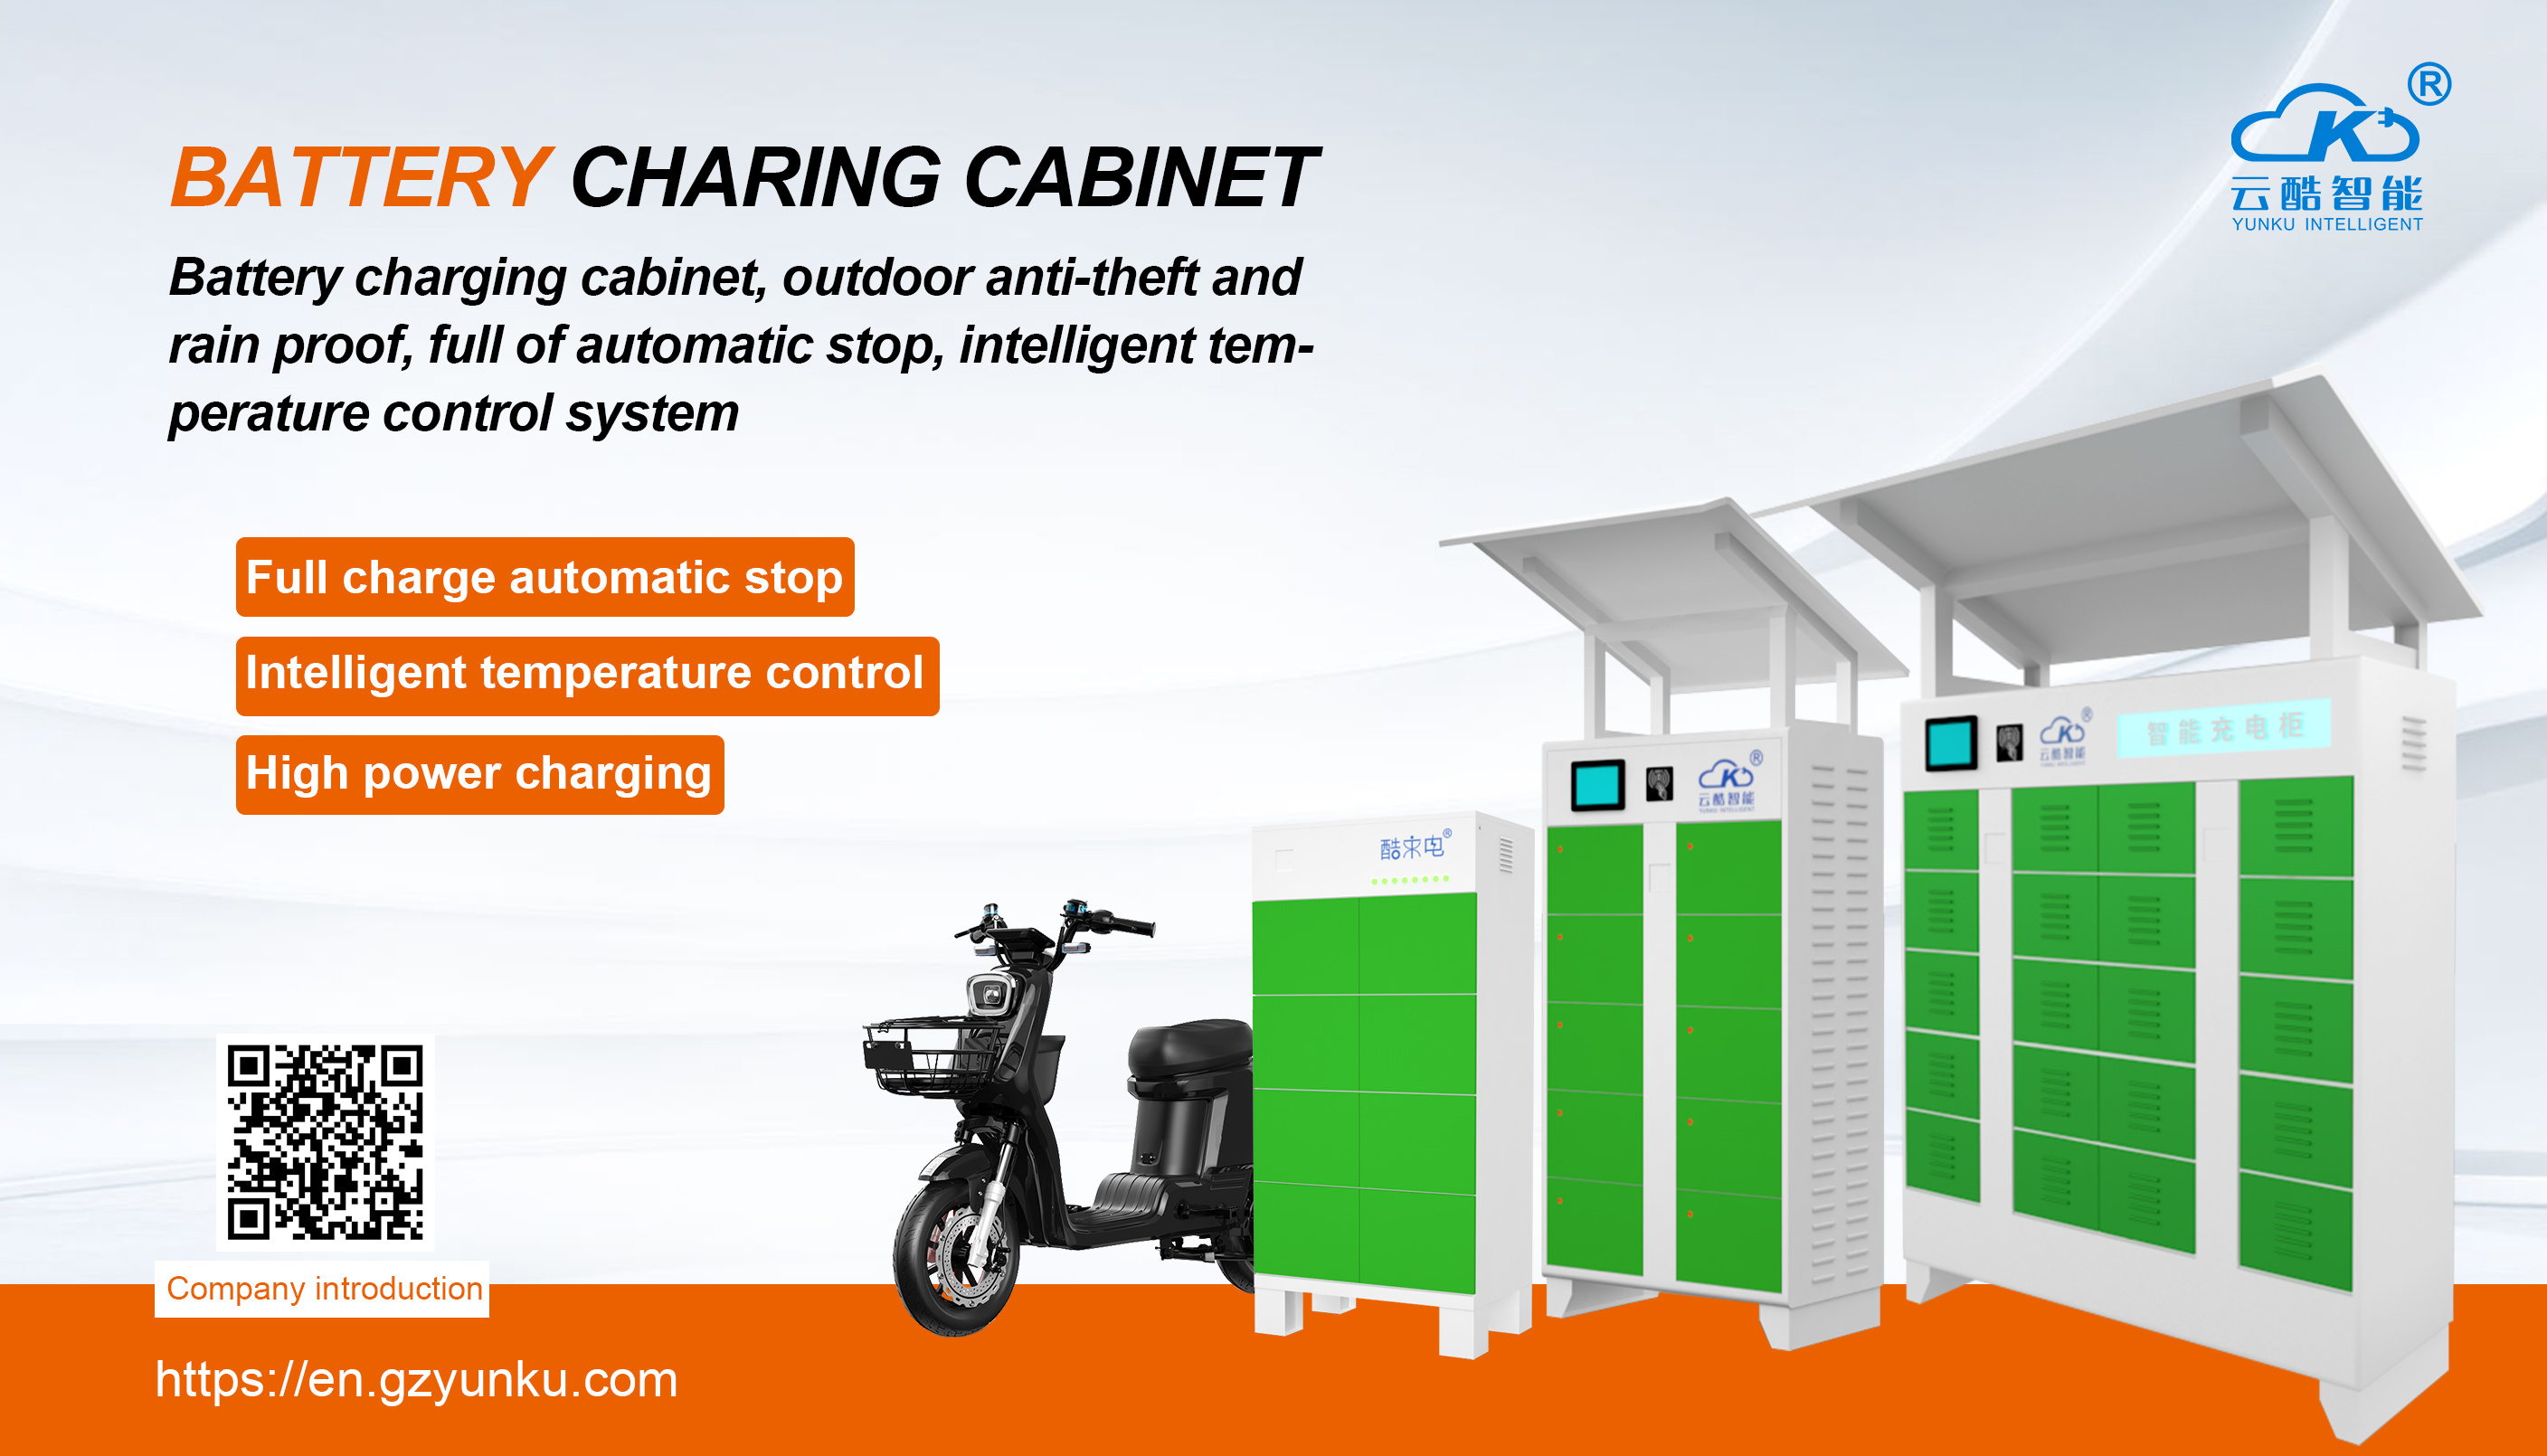 The Ultimate Guide to 12-Way Charging Stations: All You Need to Know